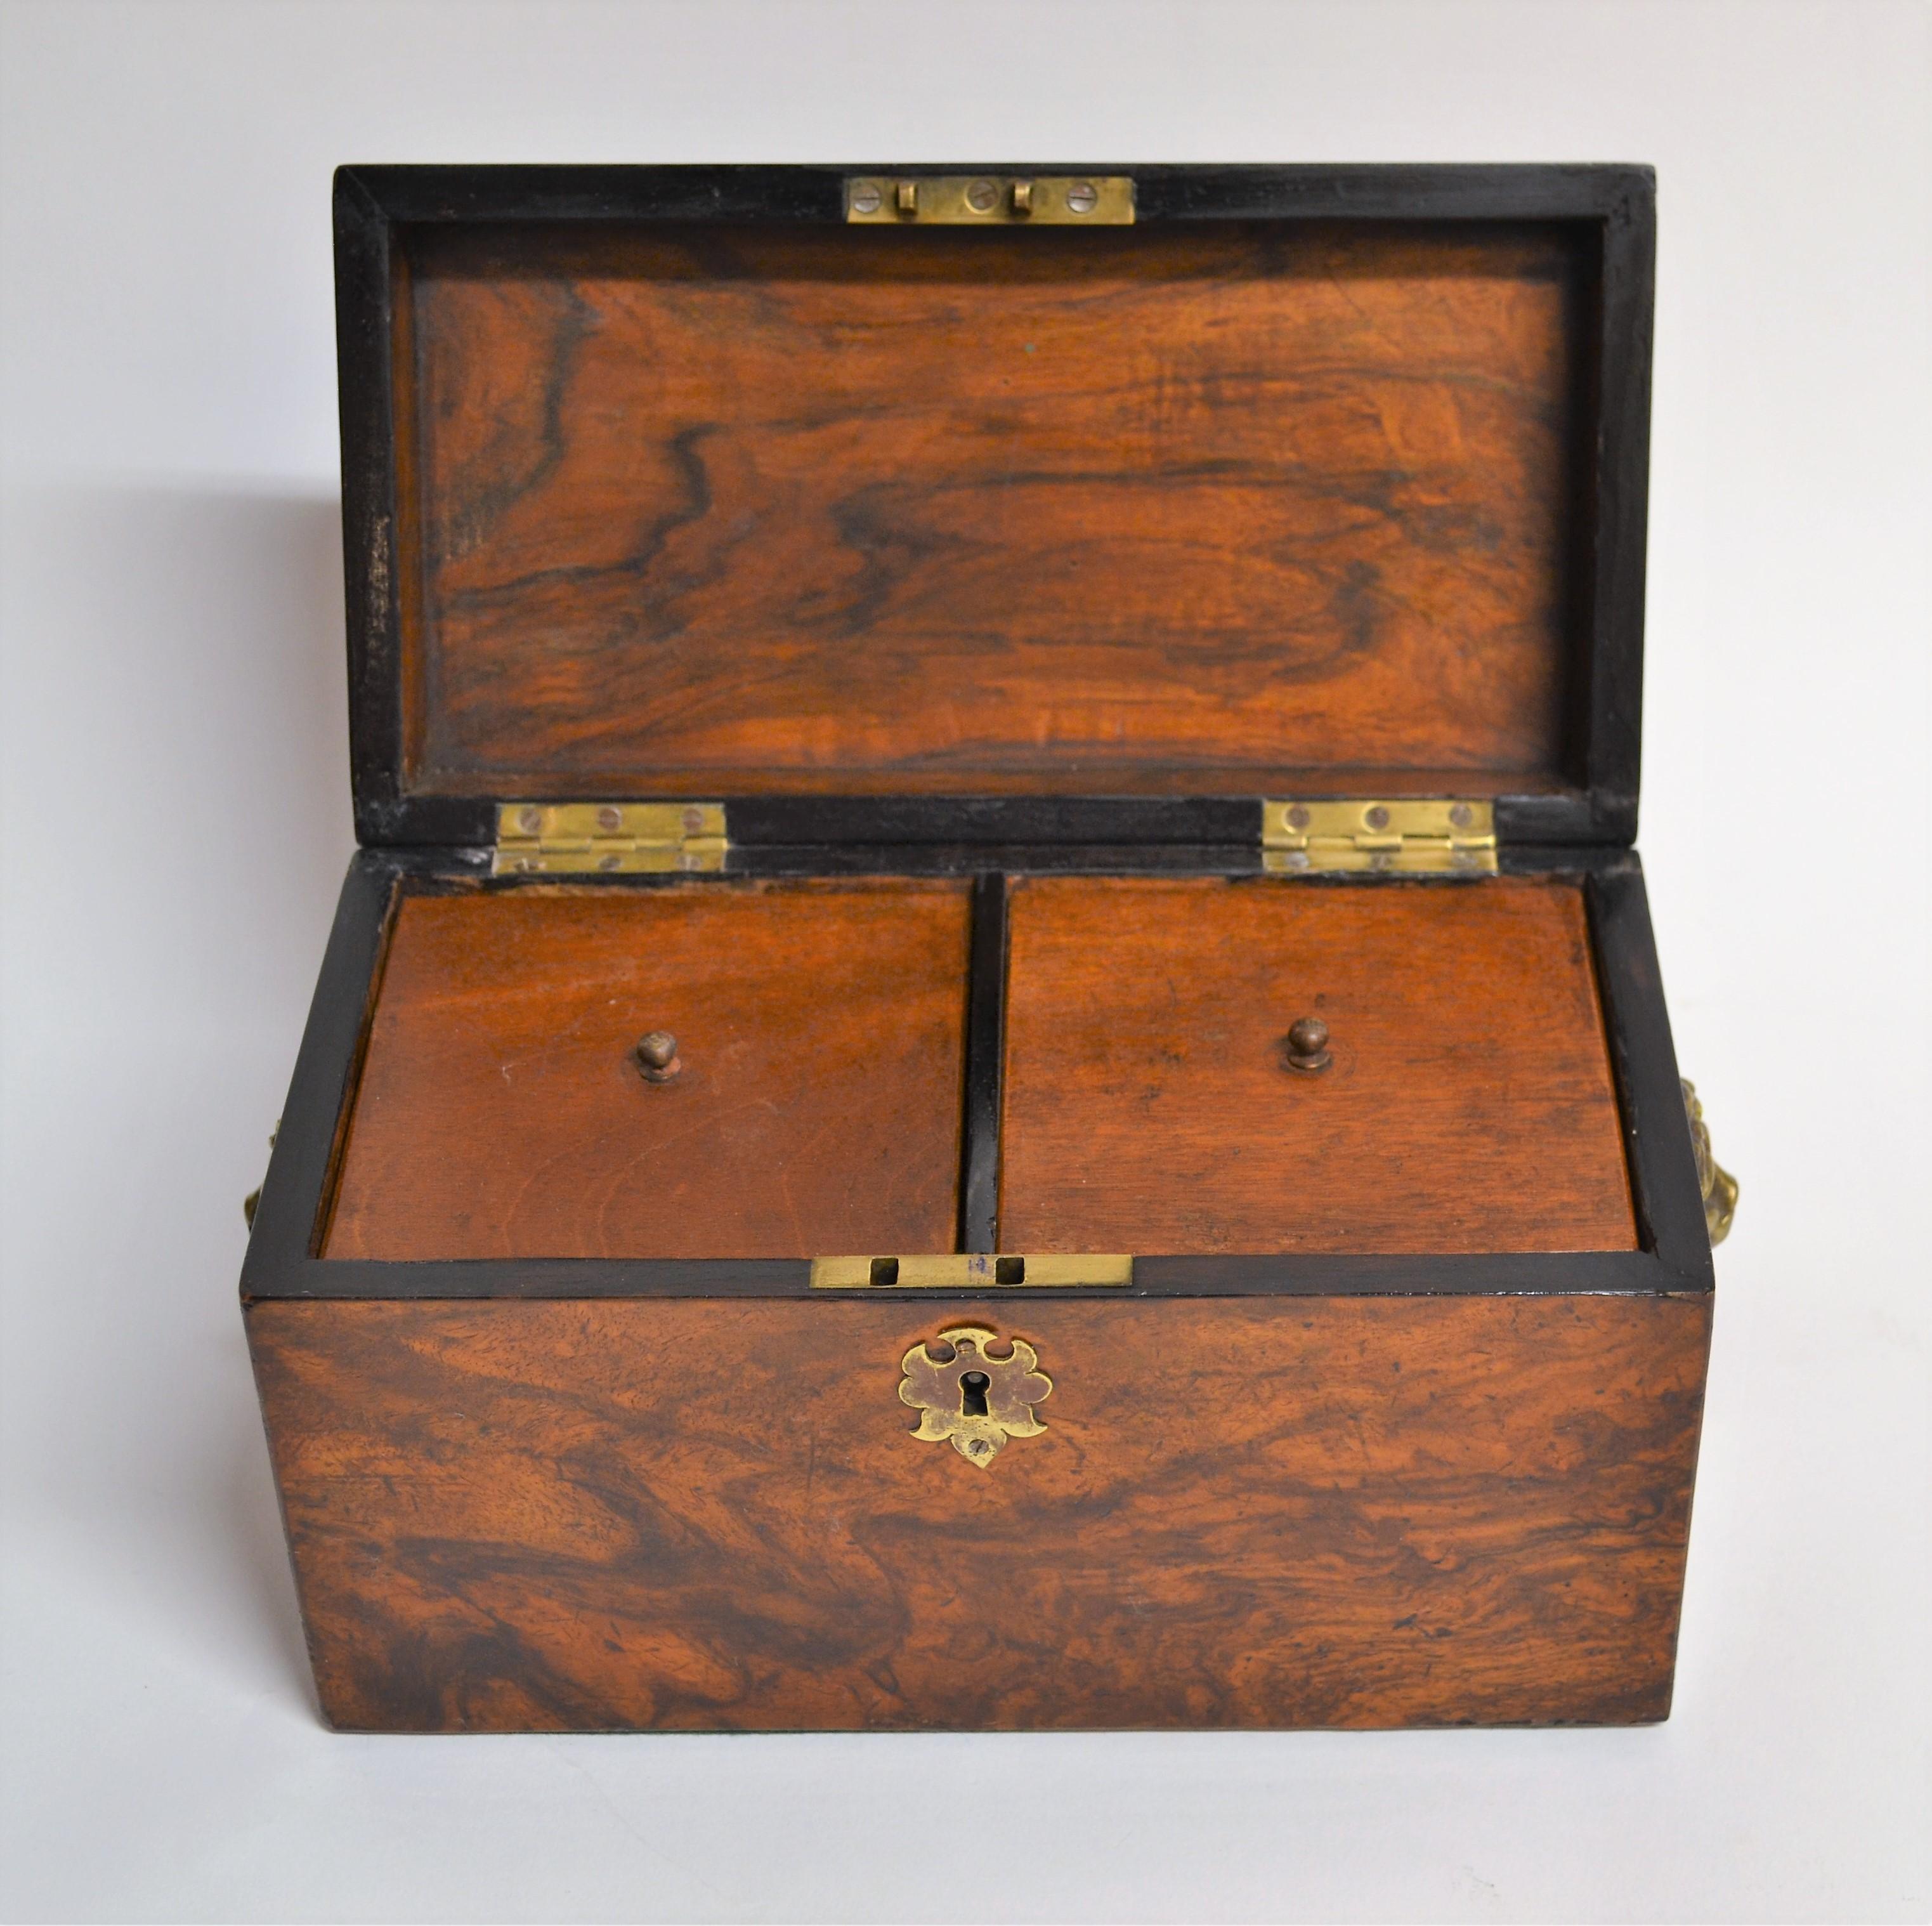 This caddy has the beautiful warm, strong colors of black walnut. A handsome decorative box, to be sure.